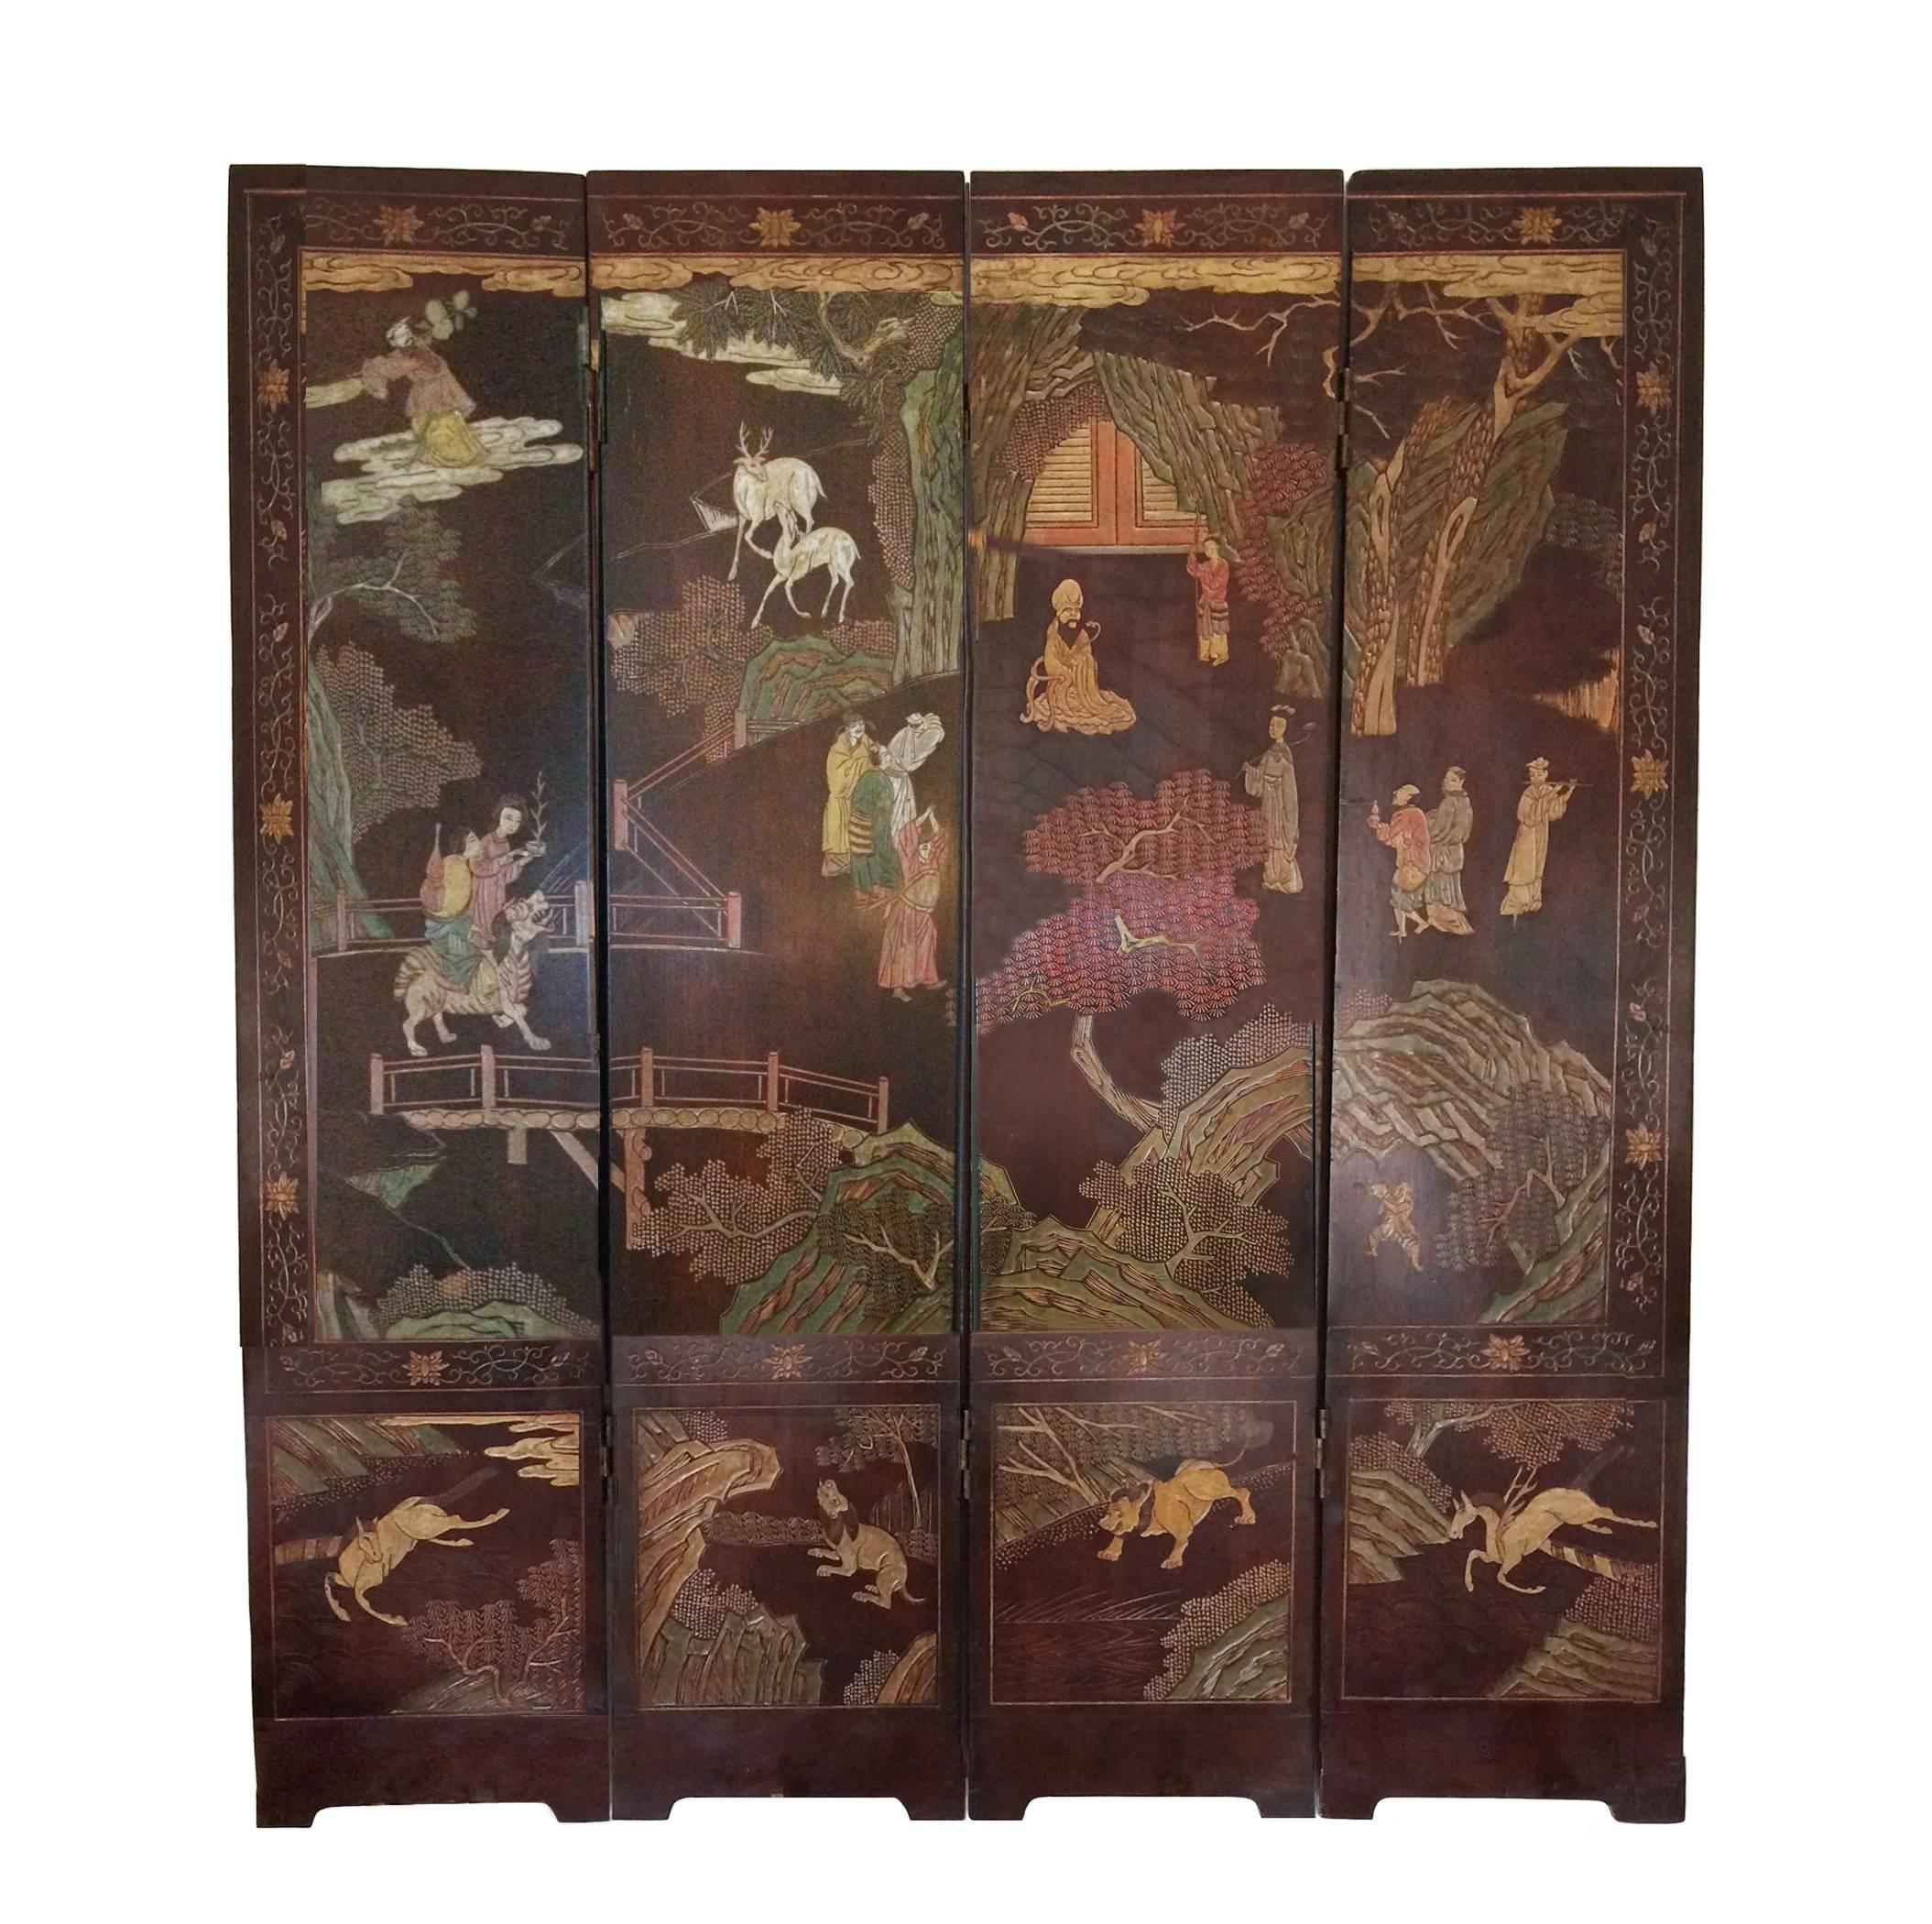 Chinese four-panel double sided Coromandel screen; rich chocolate brown ground; figural landscape on one side with exotic birds, flowers, calligraphy and mountain scenery on the other side; Qing dynasty. Each panel is 11 inches wide.